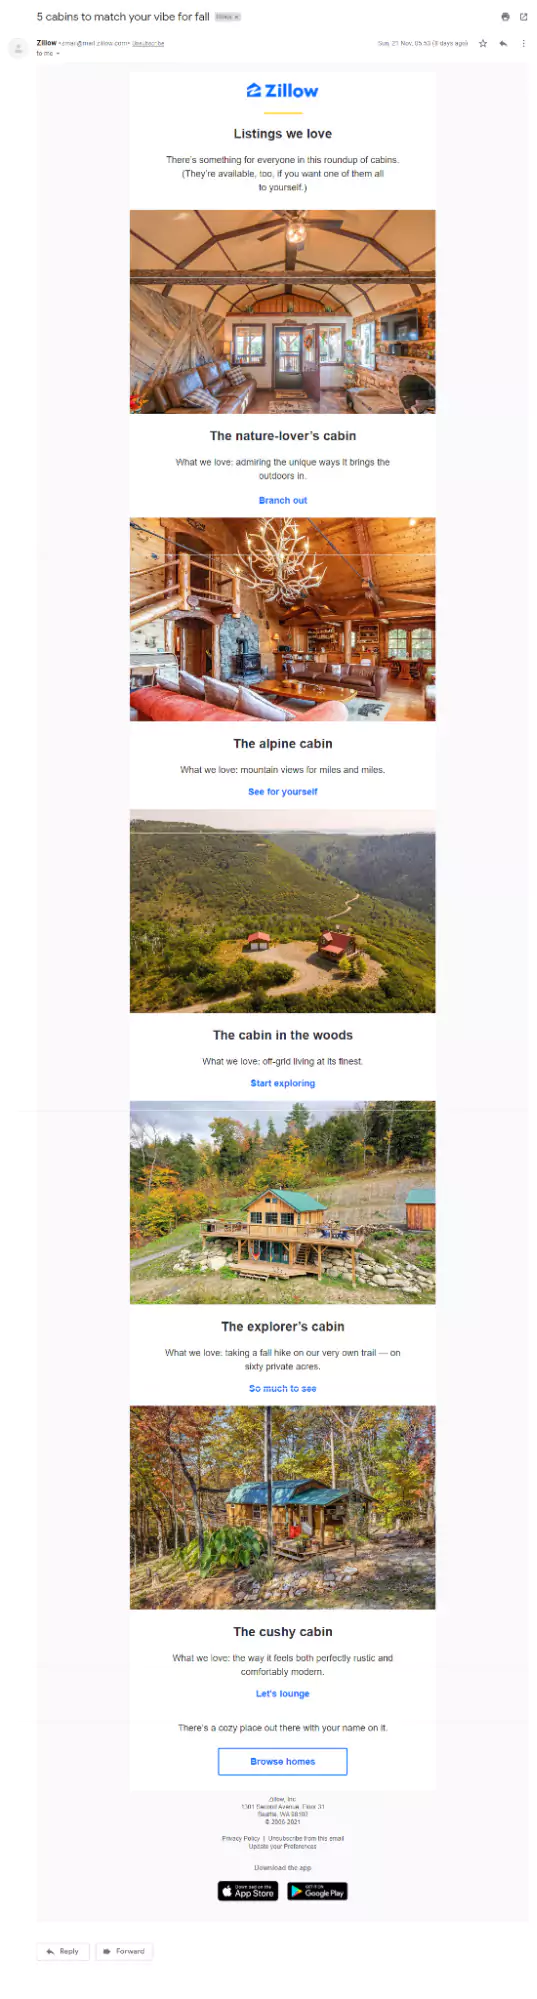 exemple emailing design Zillow